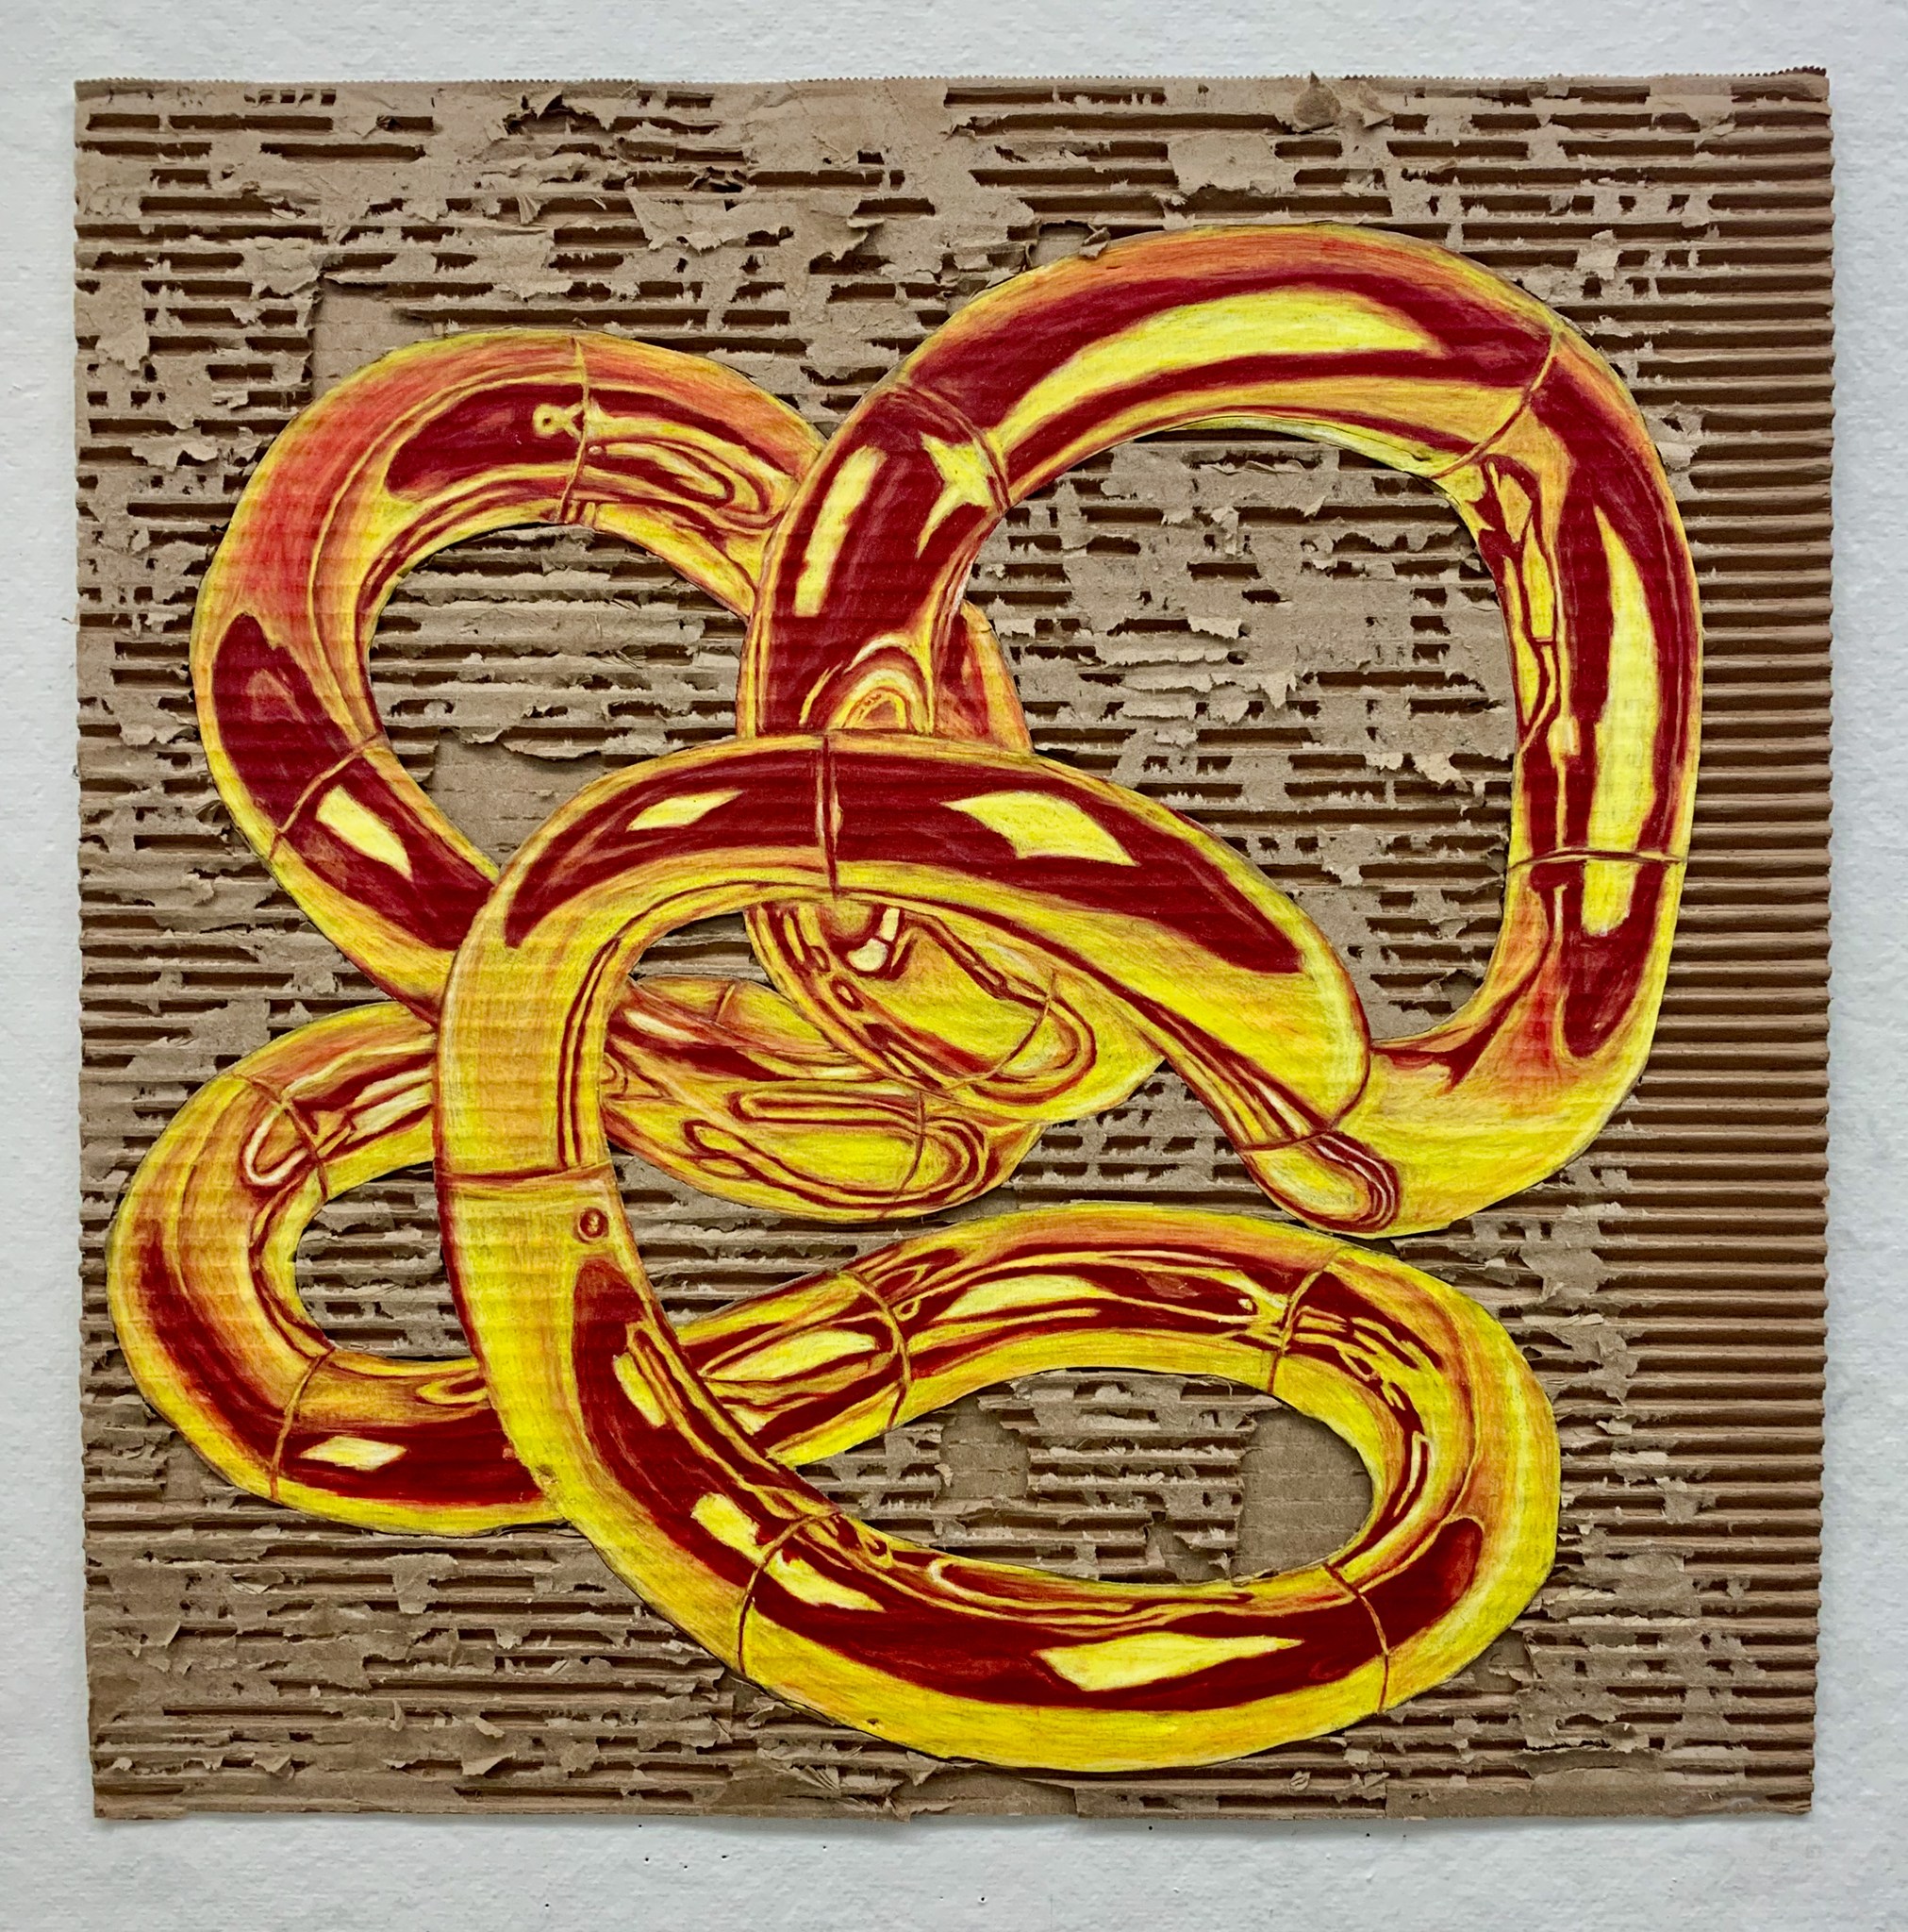 This is a unique abstract painting featuring a beautiful mix of yellow and red loops entwined together, all perfectly set against an artistically textured brown backdrop.